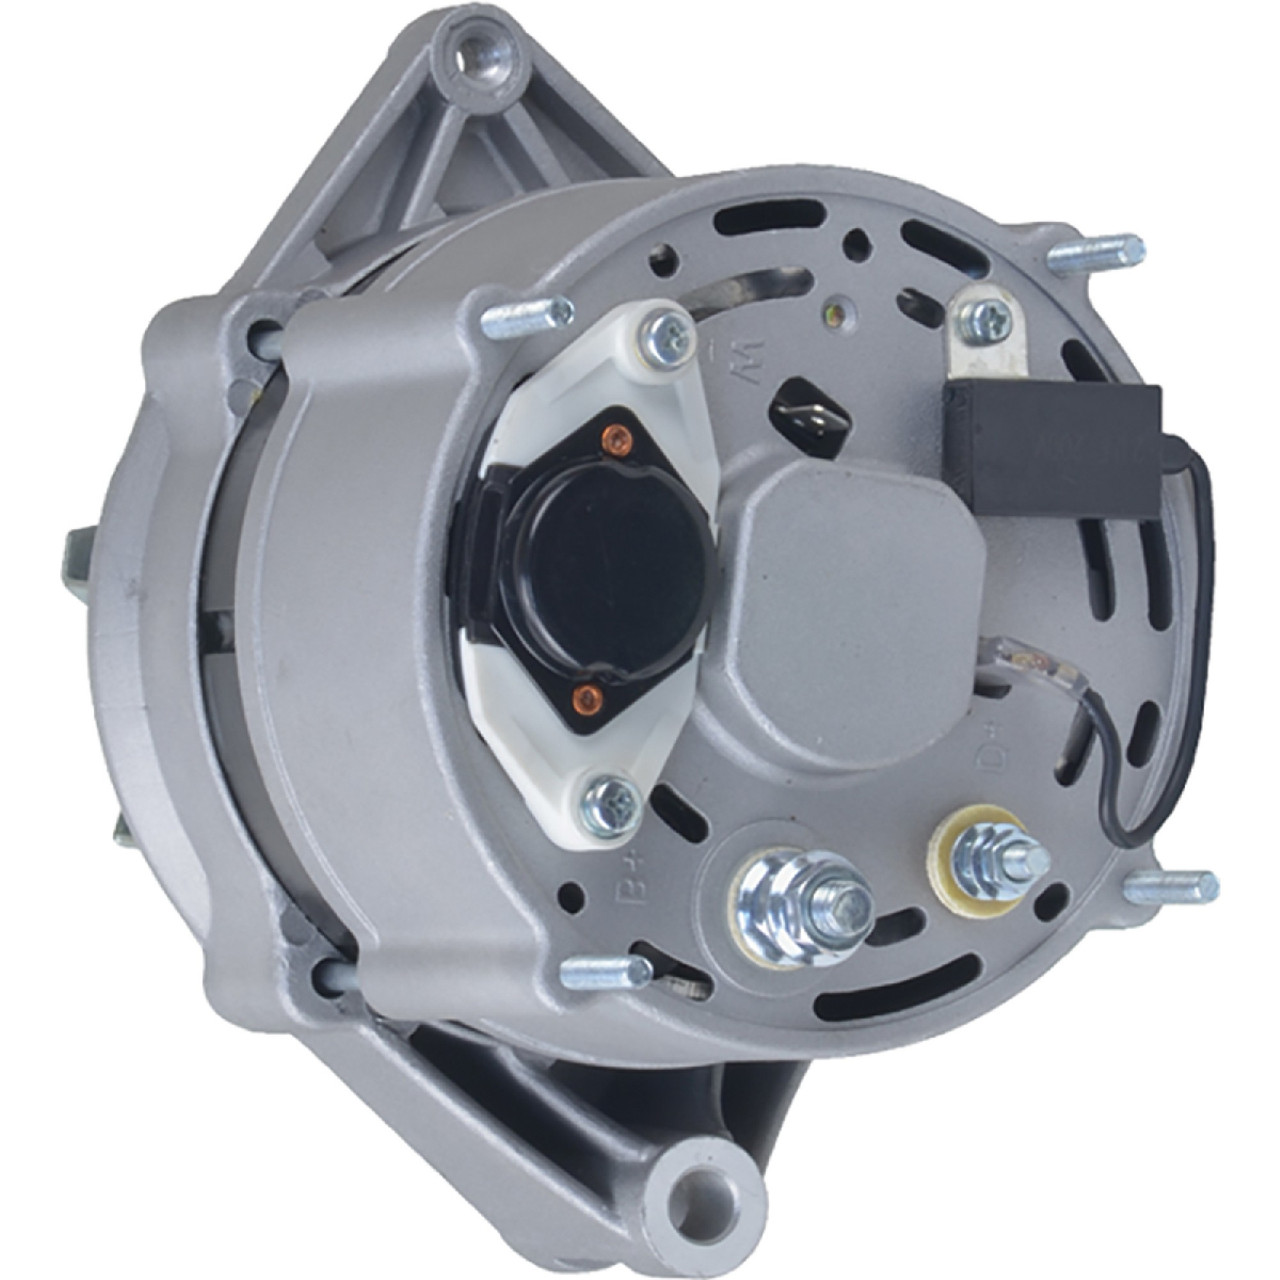 NEW Alternator for CASE IH, JOHN DEERE, NEW HOLLAND, THERMO KING & TUG  AS100, GPU 400 Applications; 400-24009, 3604448RX, 3920679, A187873,  44-8499;